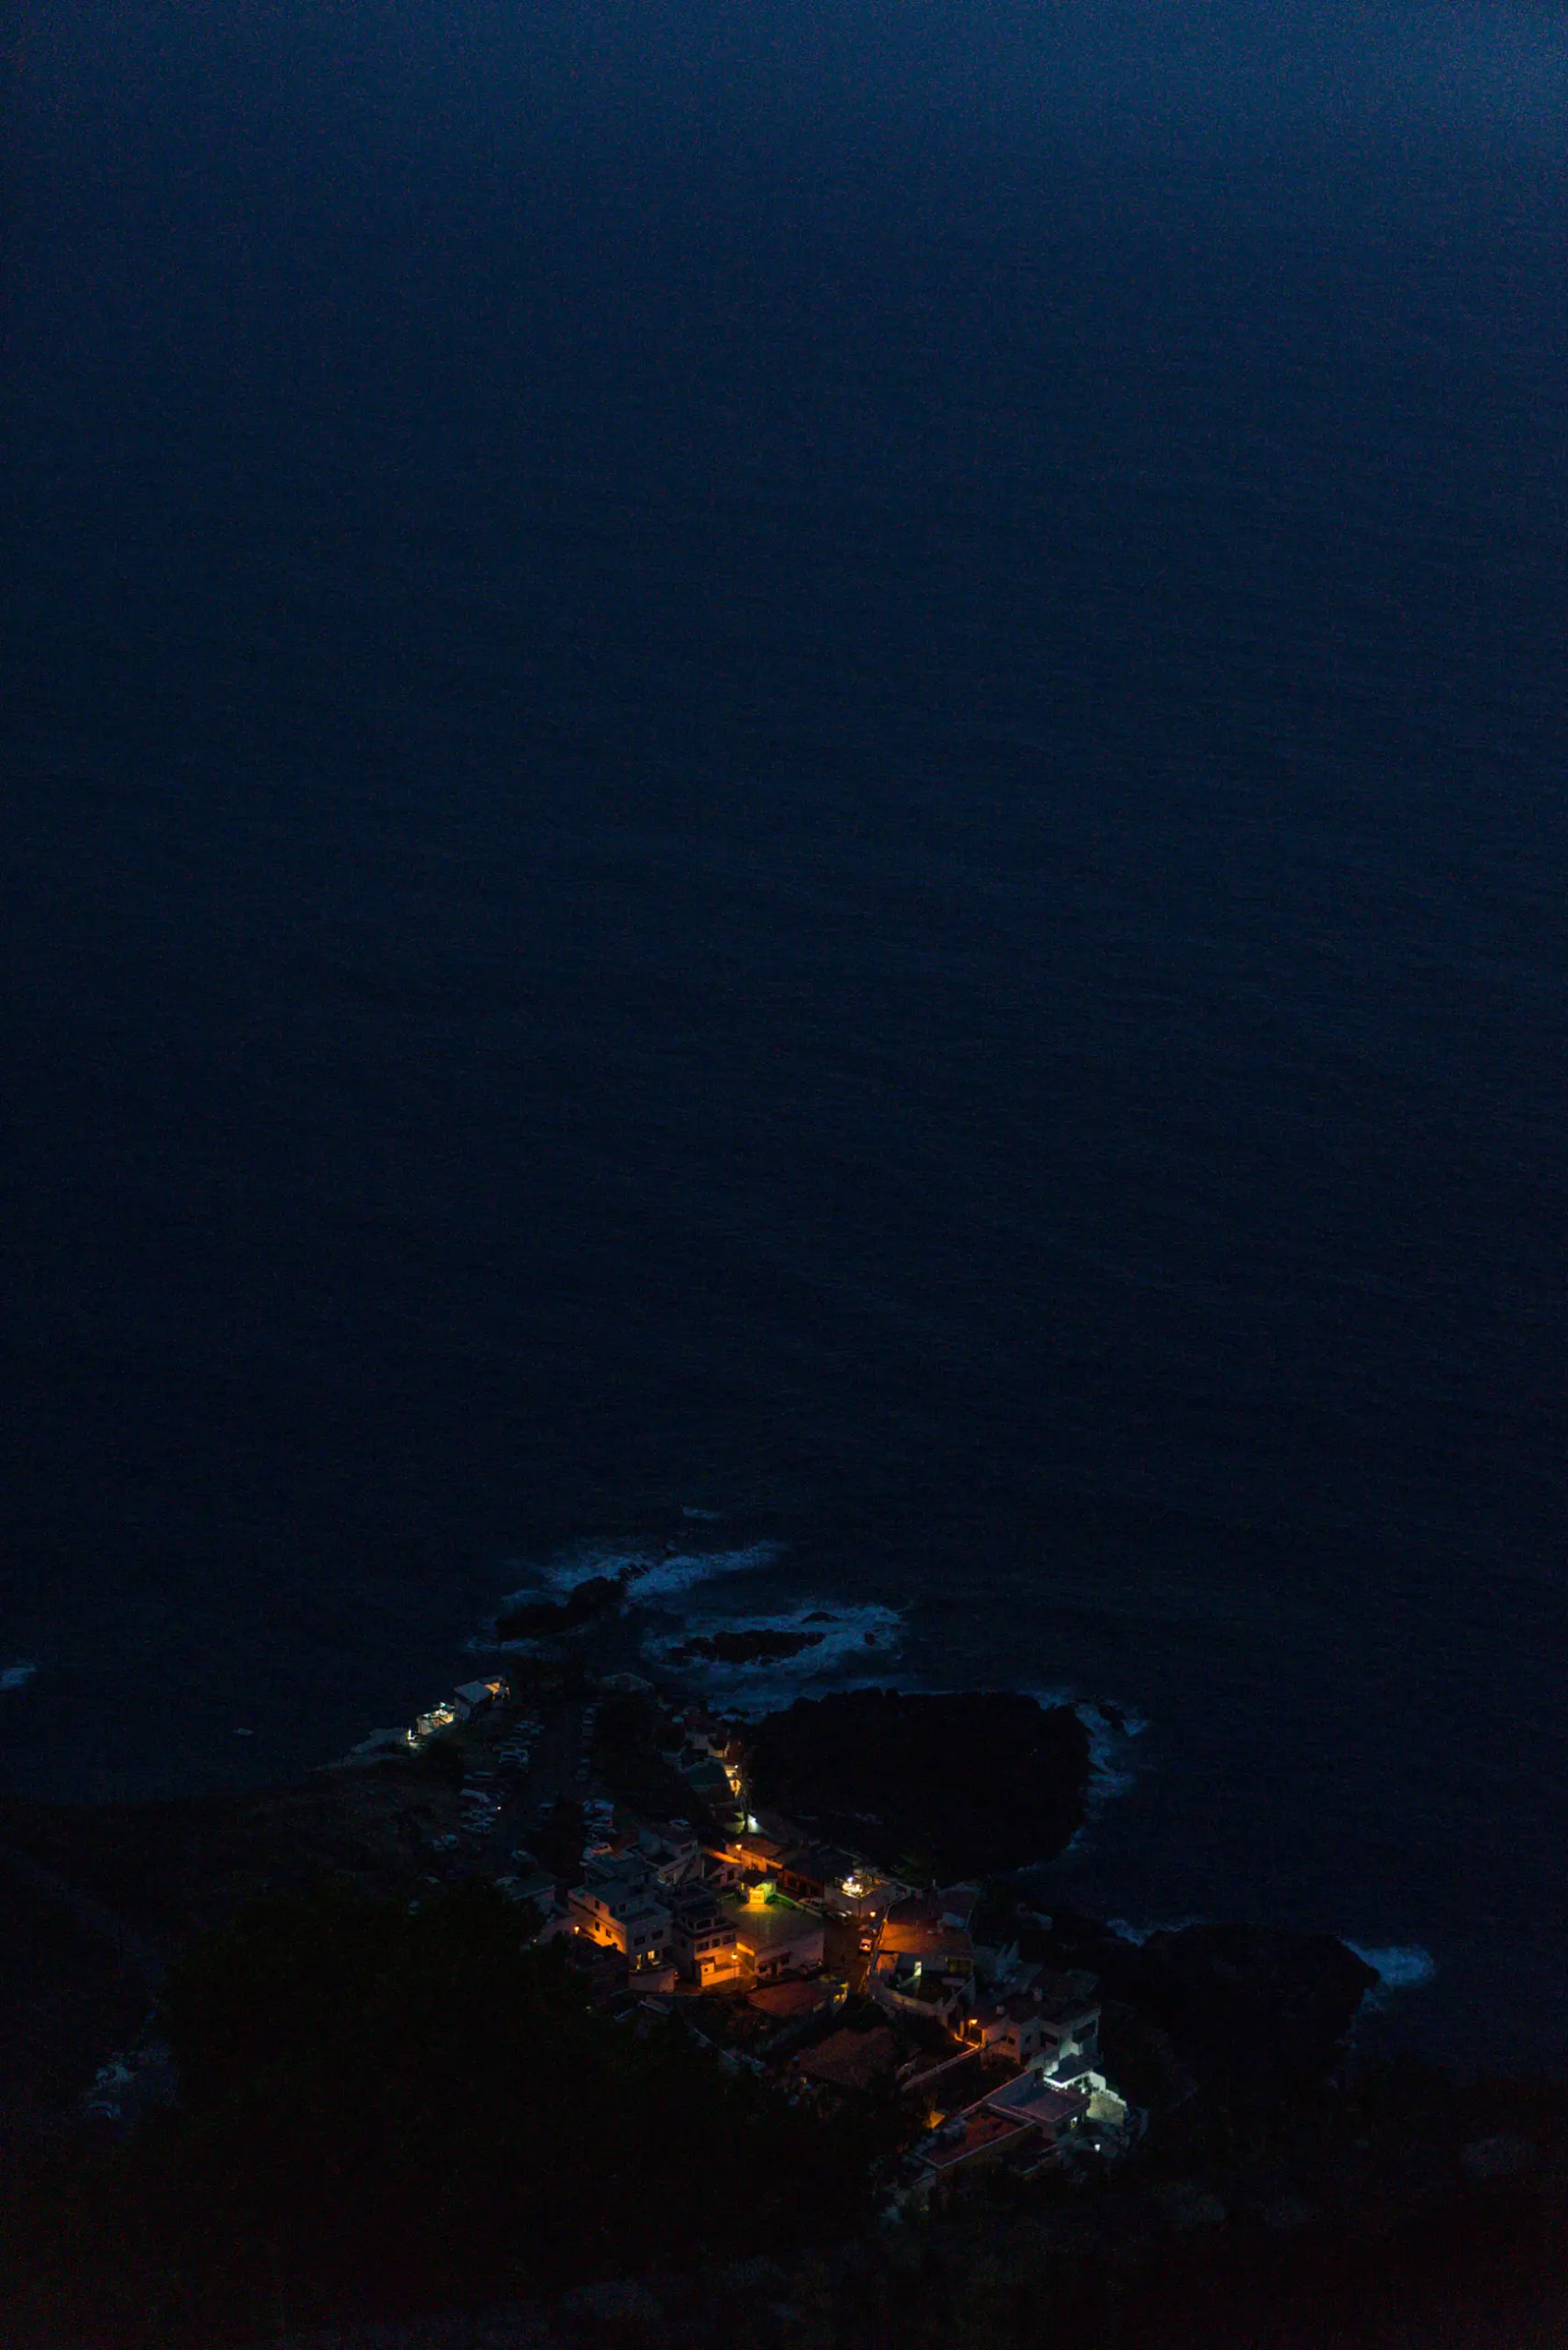 still photo of small village next to the sea by night